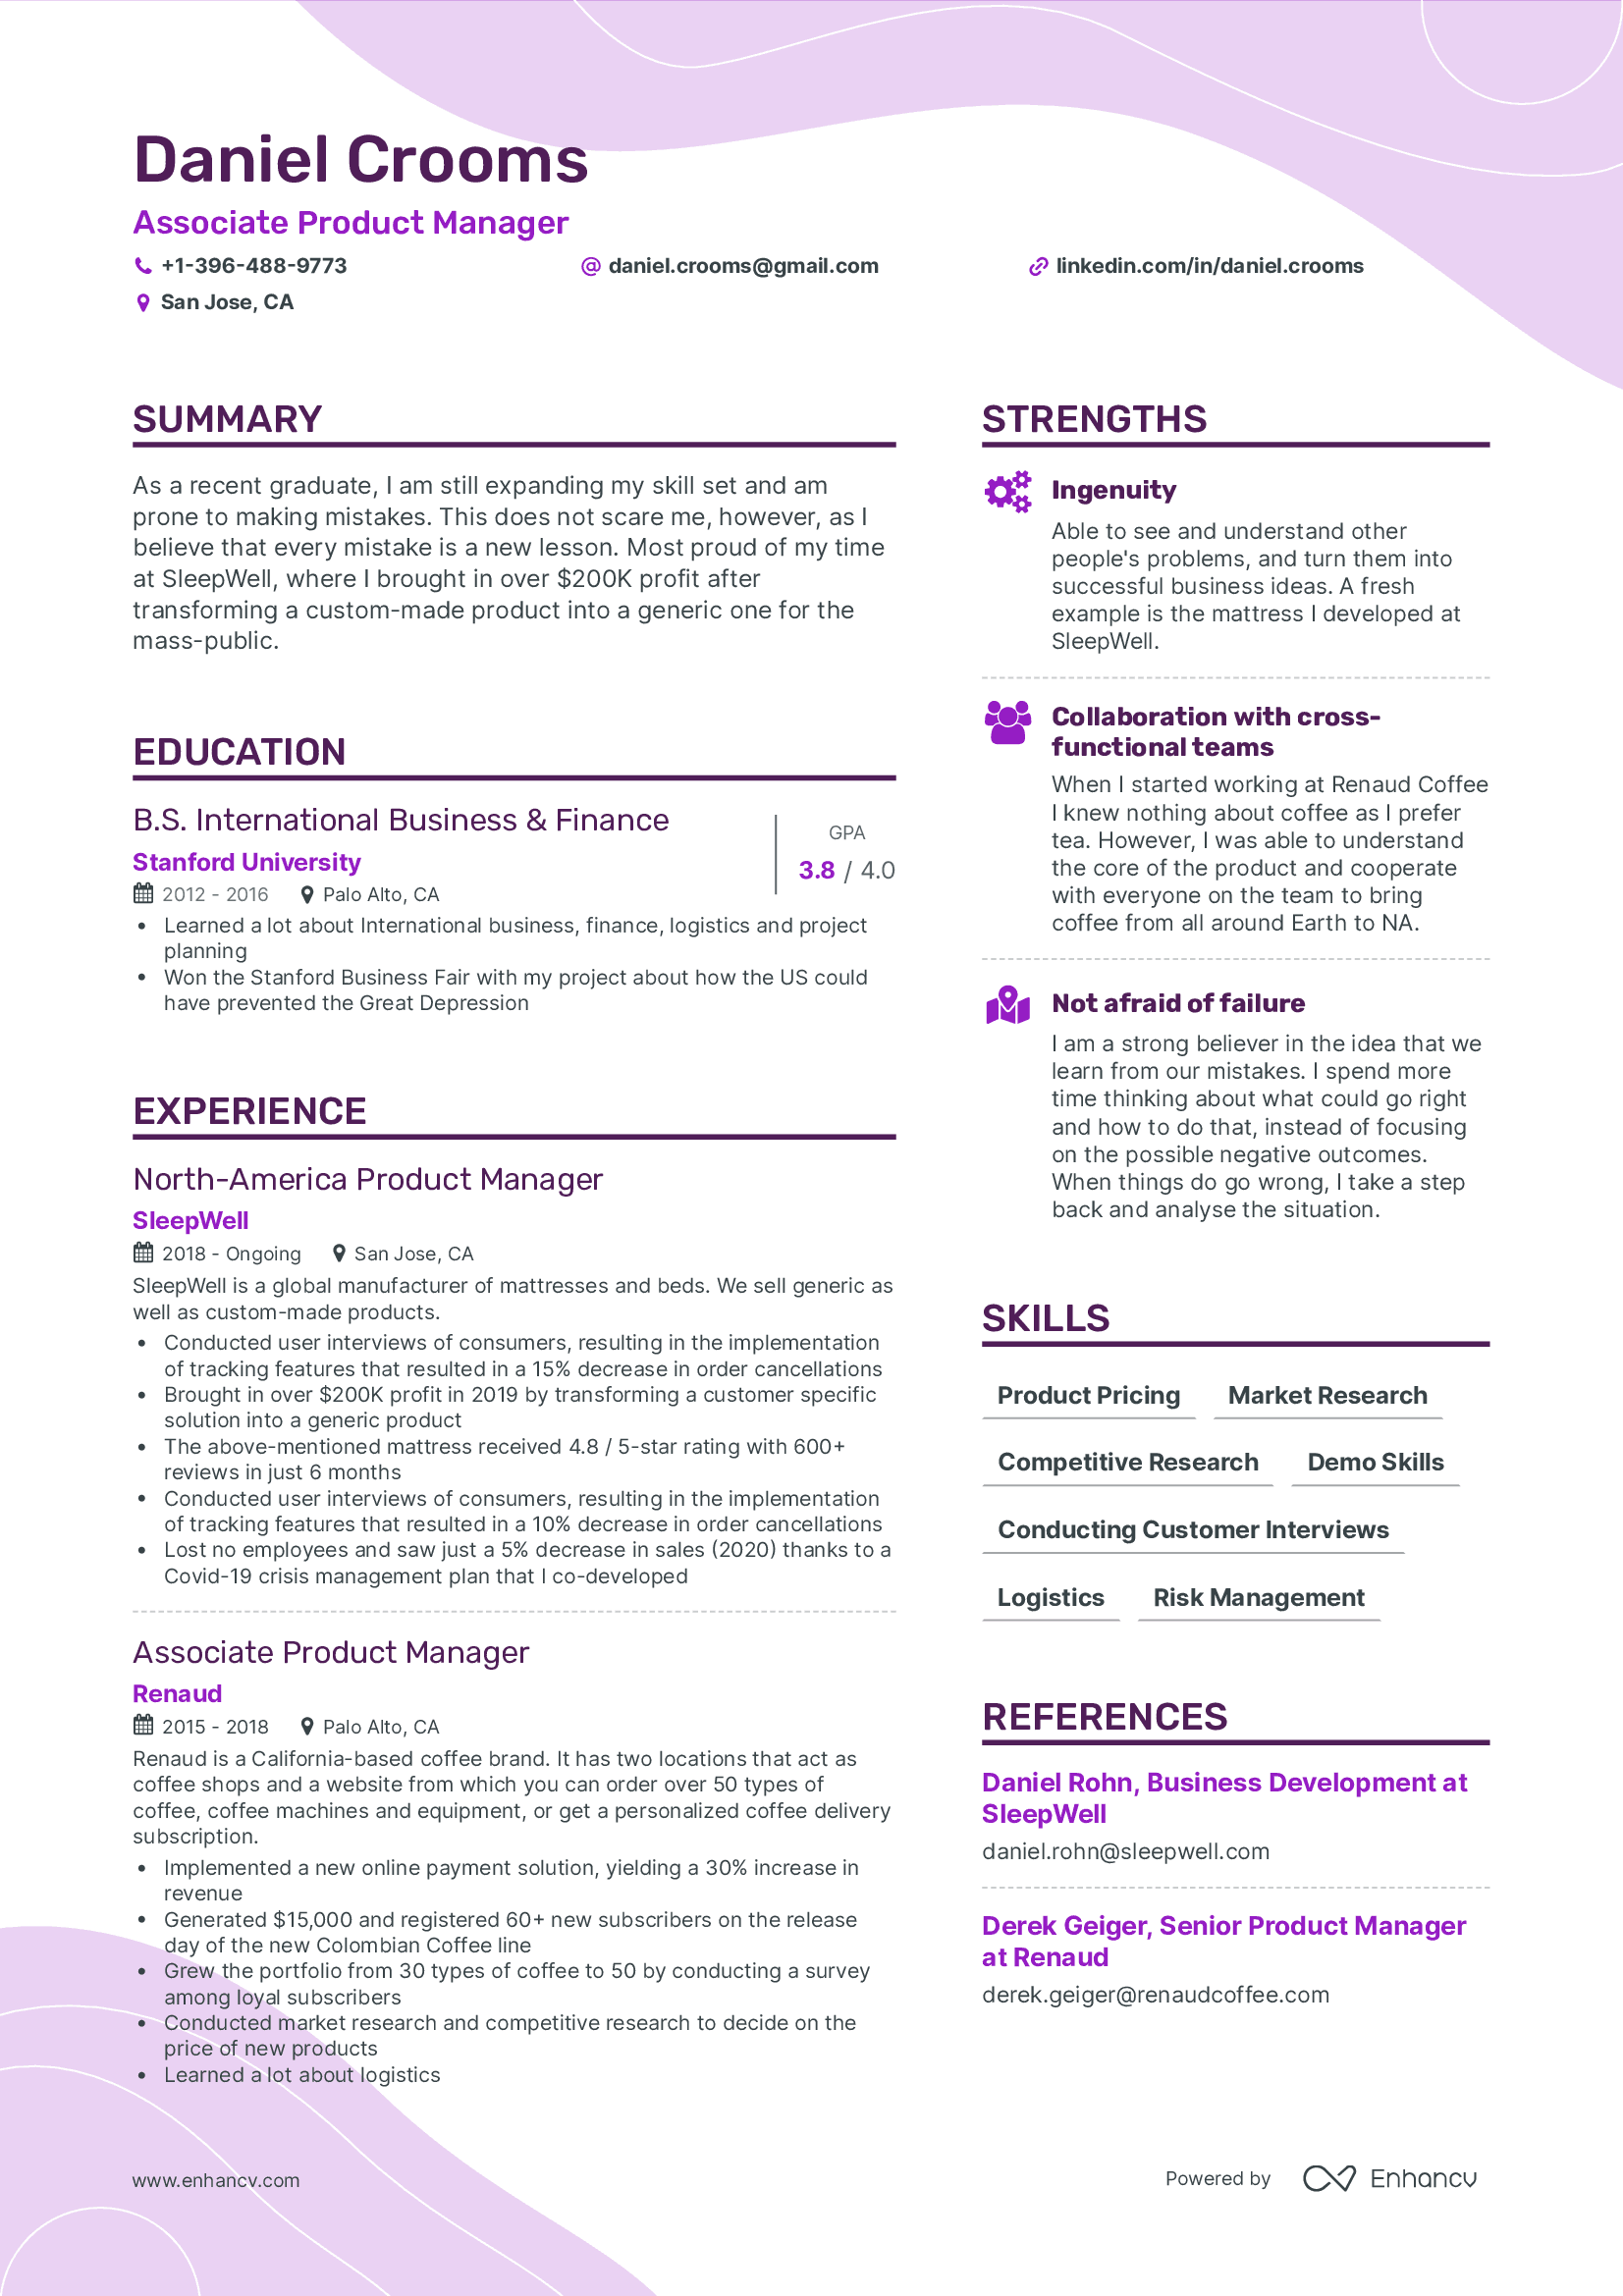 Associate Product Manager resume